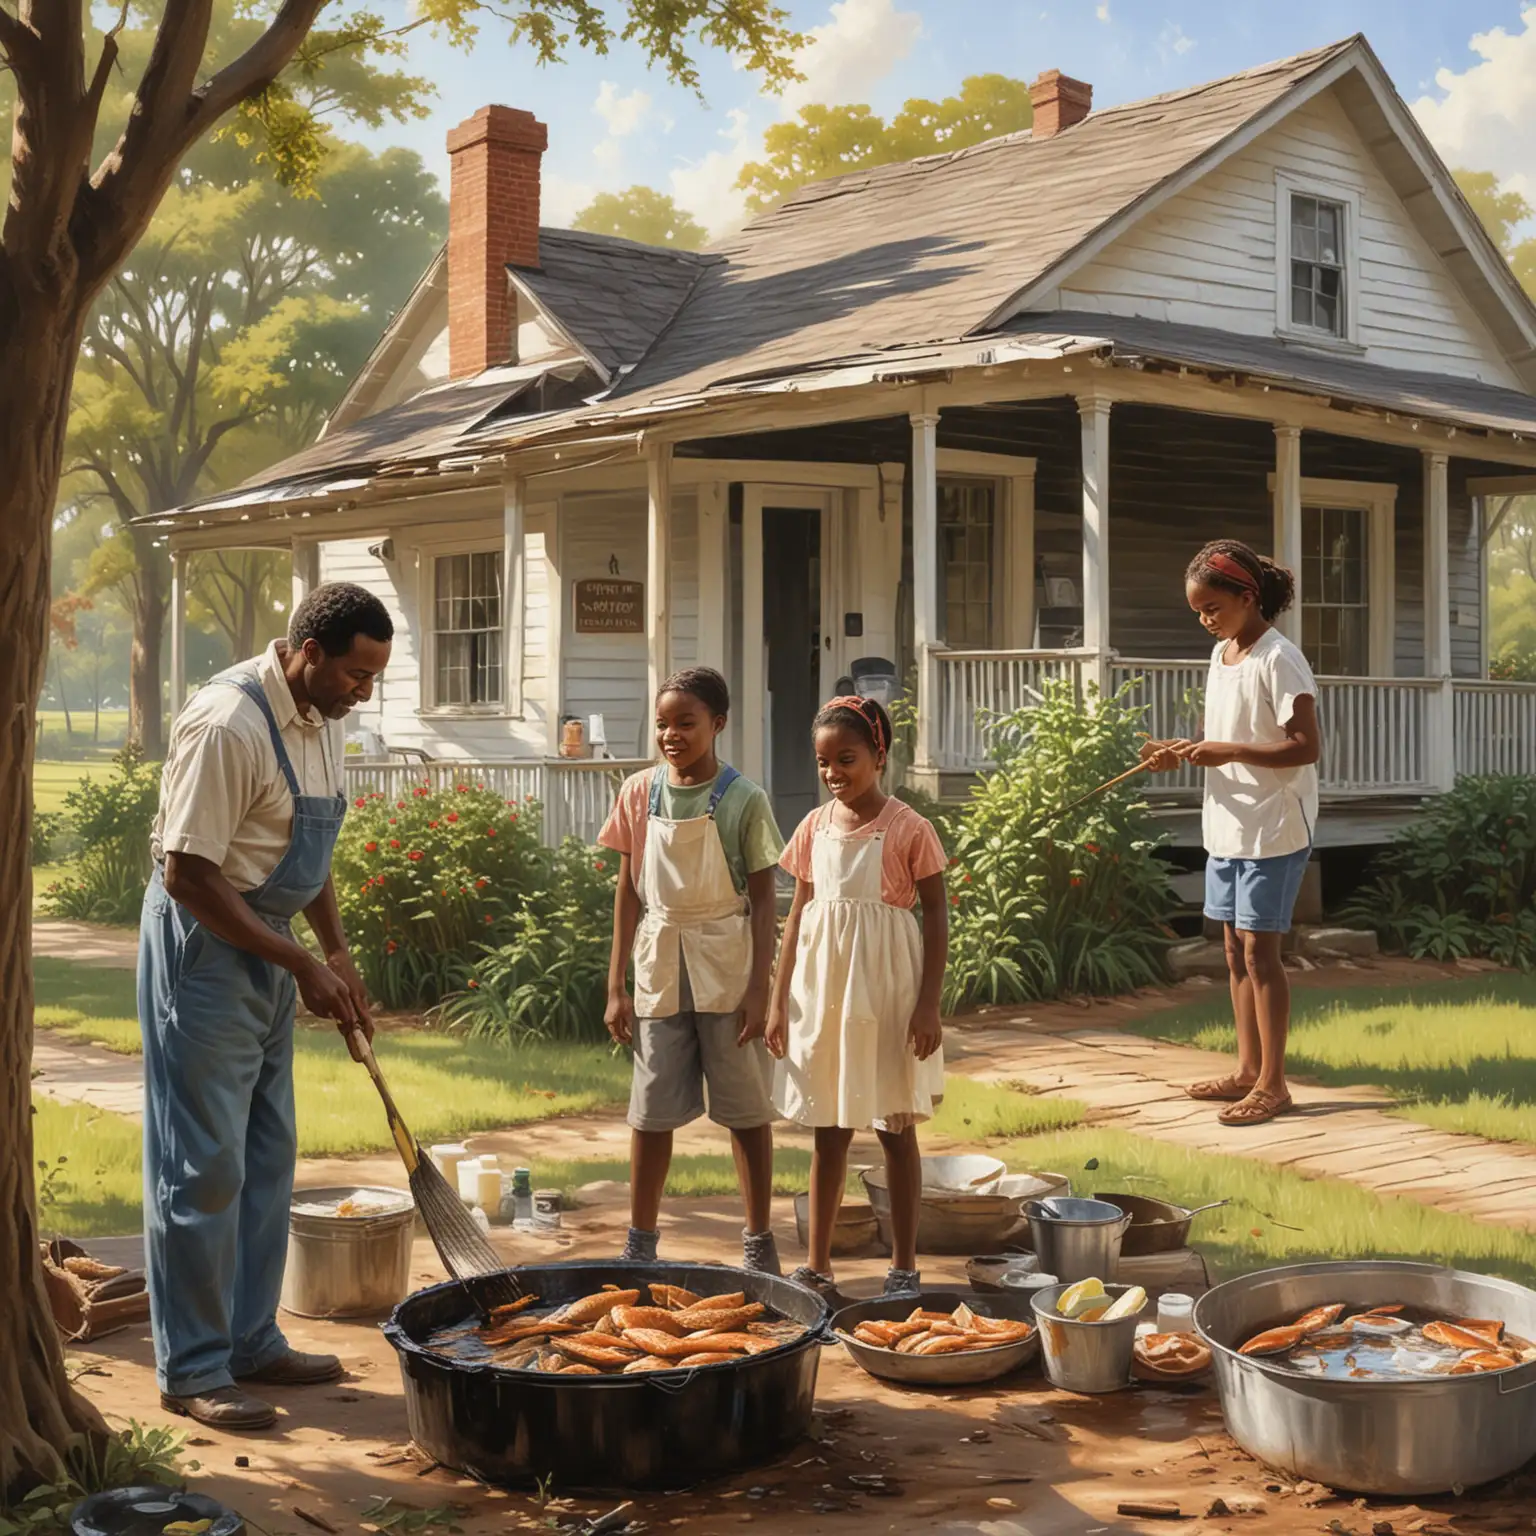 paint a picture of a southern style African American family having an outdoor fish fry,  from freshly caught fish, cleaning and frying, paint an old southern house in the background, 